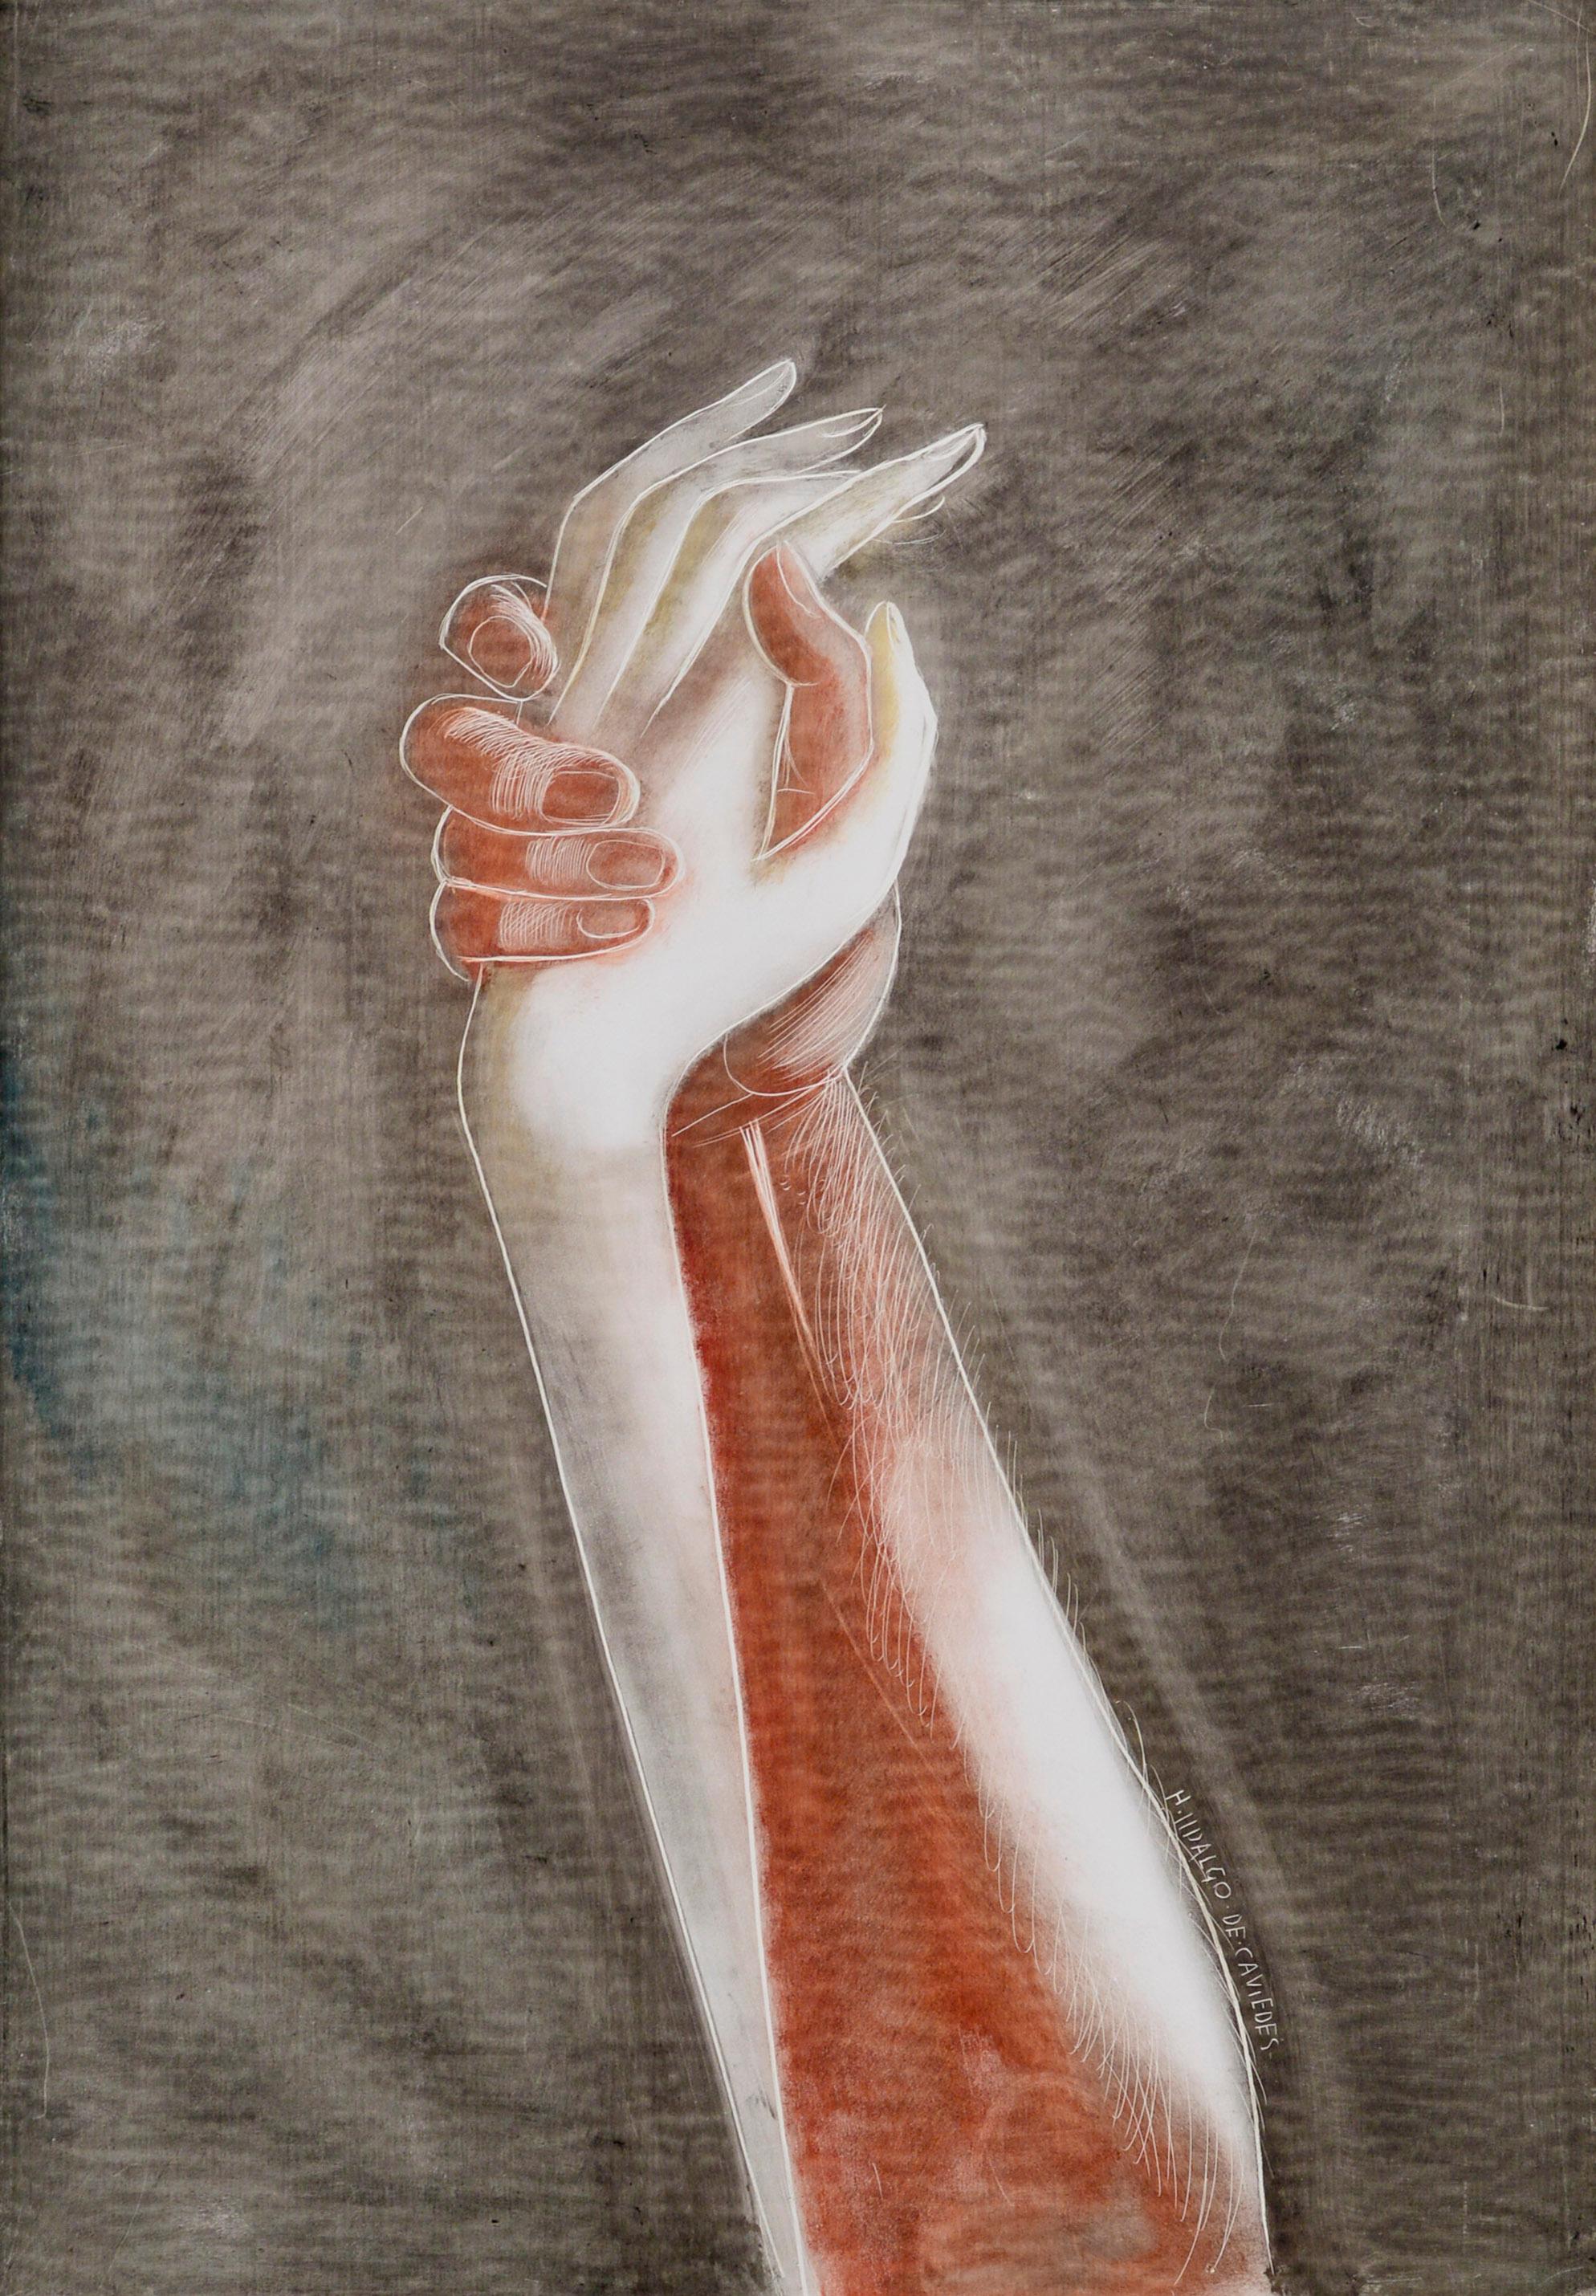 Two Intertwined Hands - Painting by Hipólito Hidalgo de Caviedes